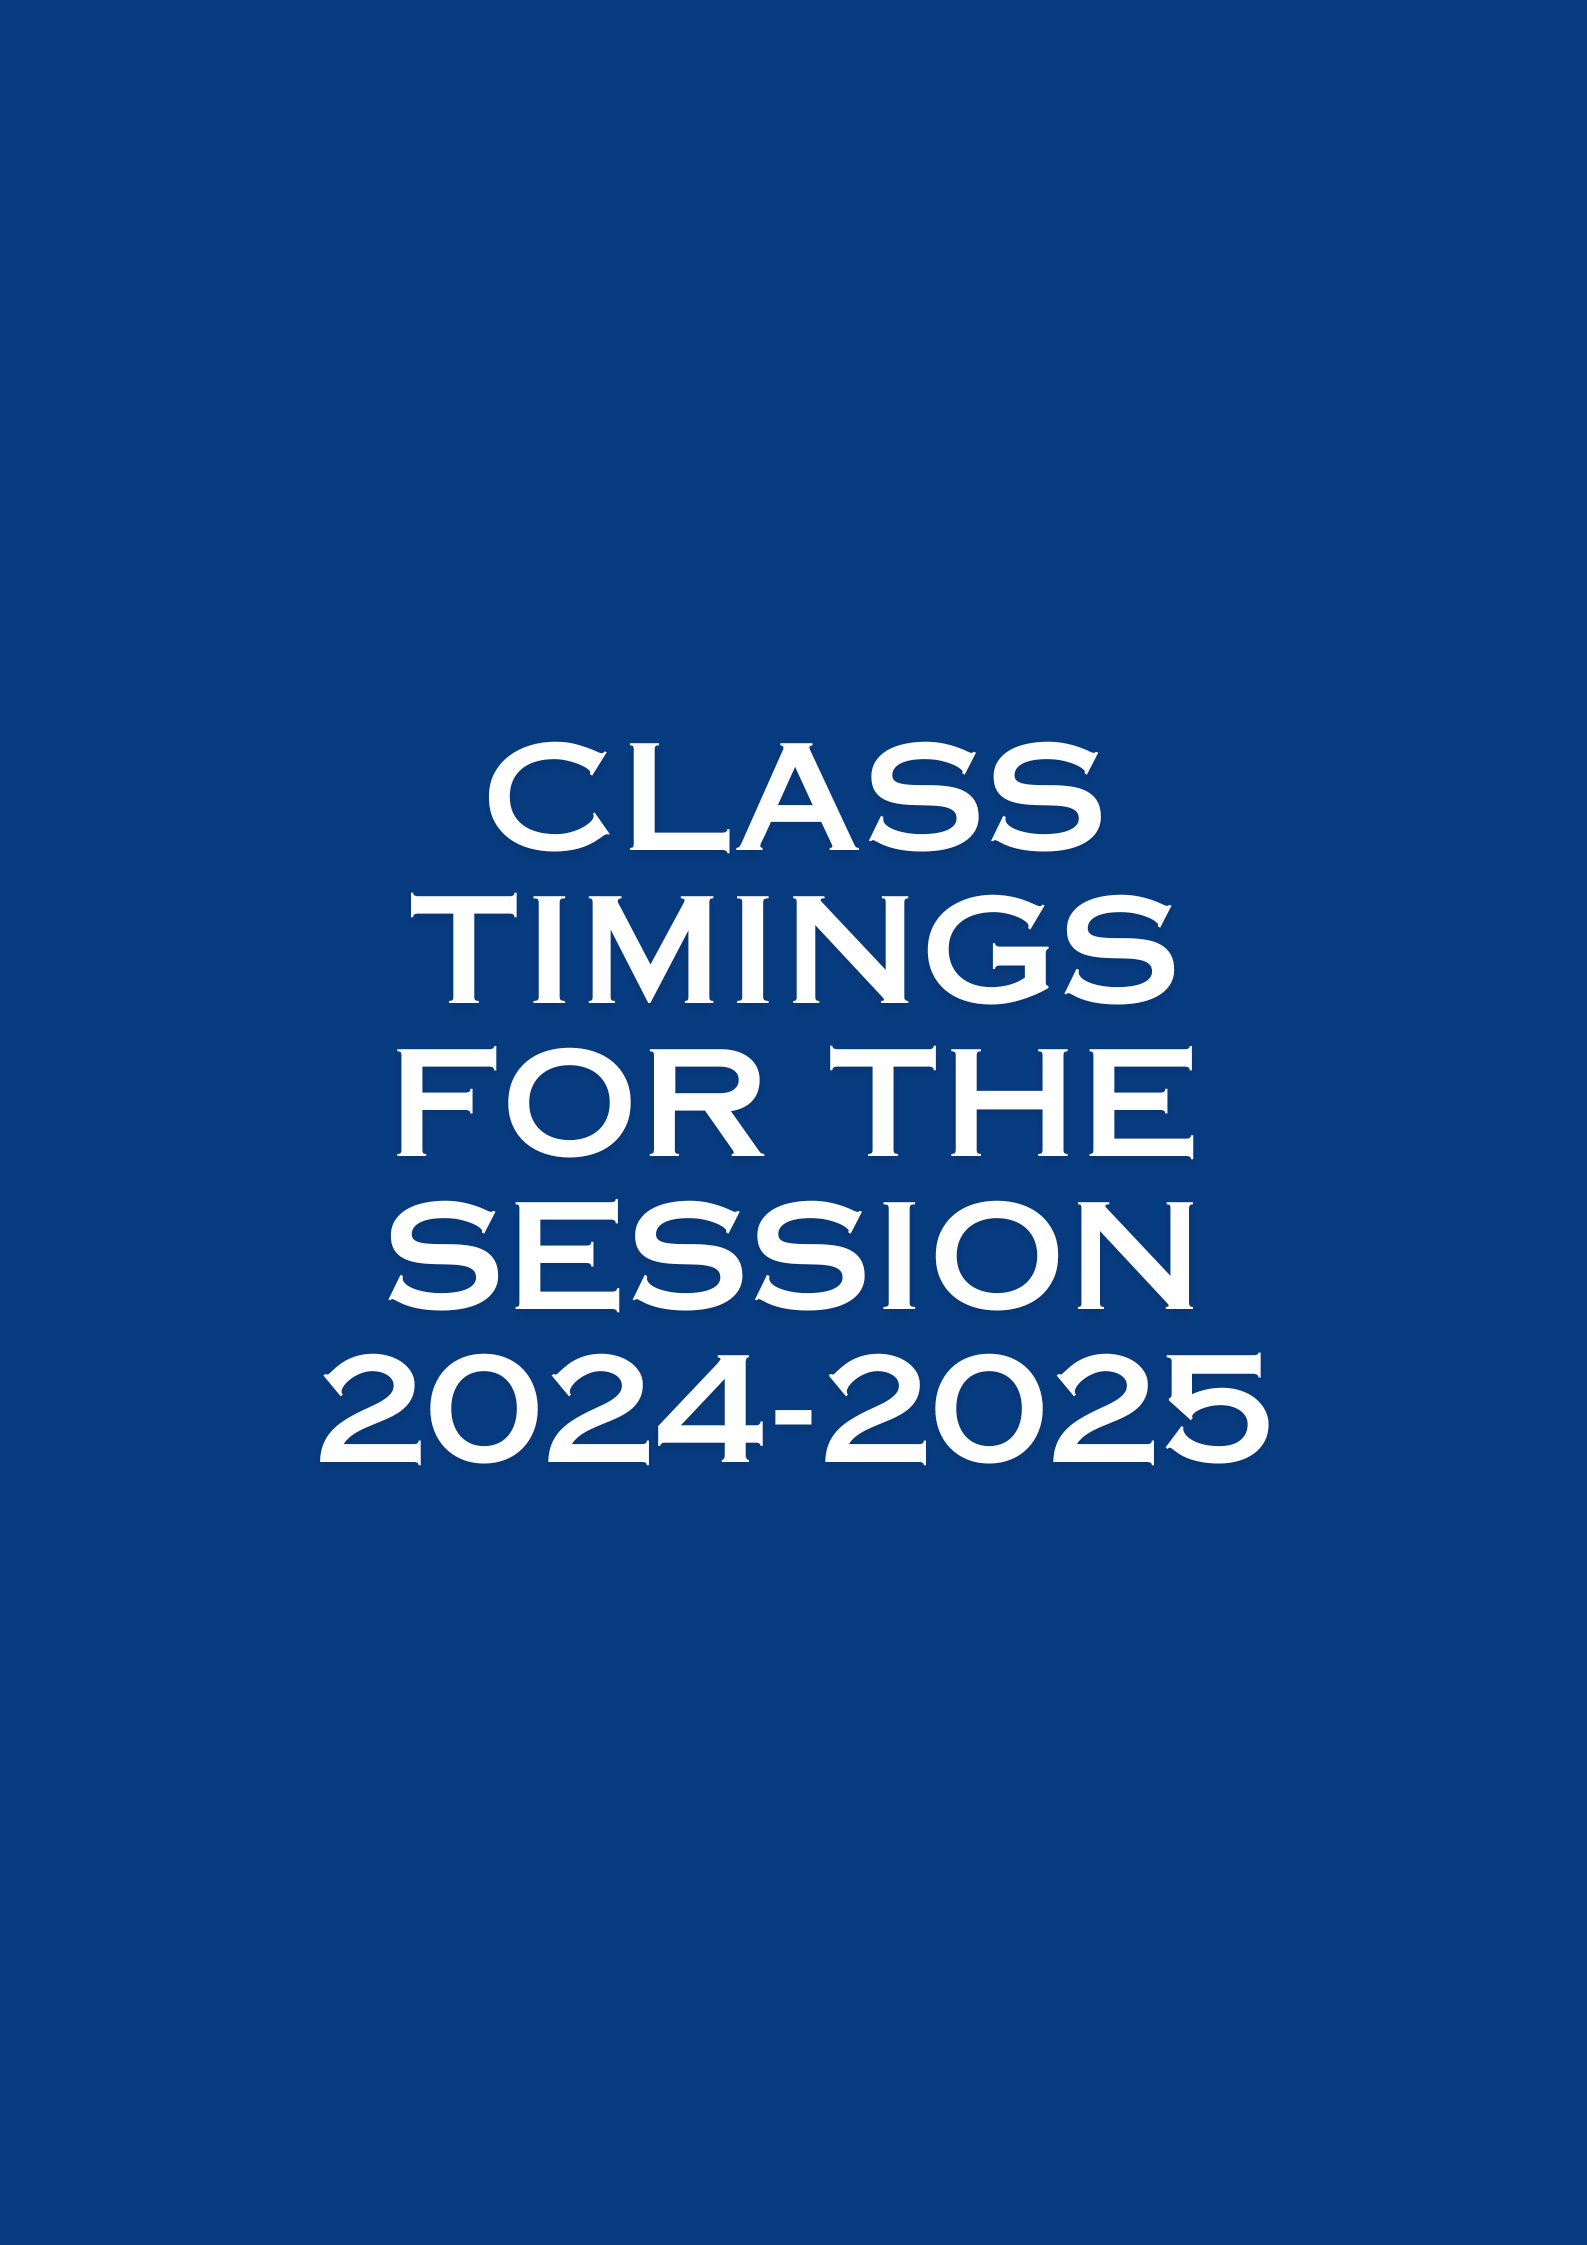 NOTICE FOR CLASS TIMINGS FOR THE SESSION 2024-2025